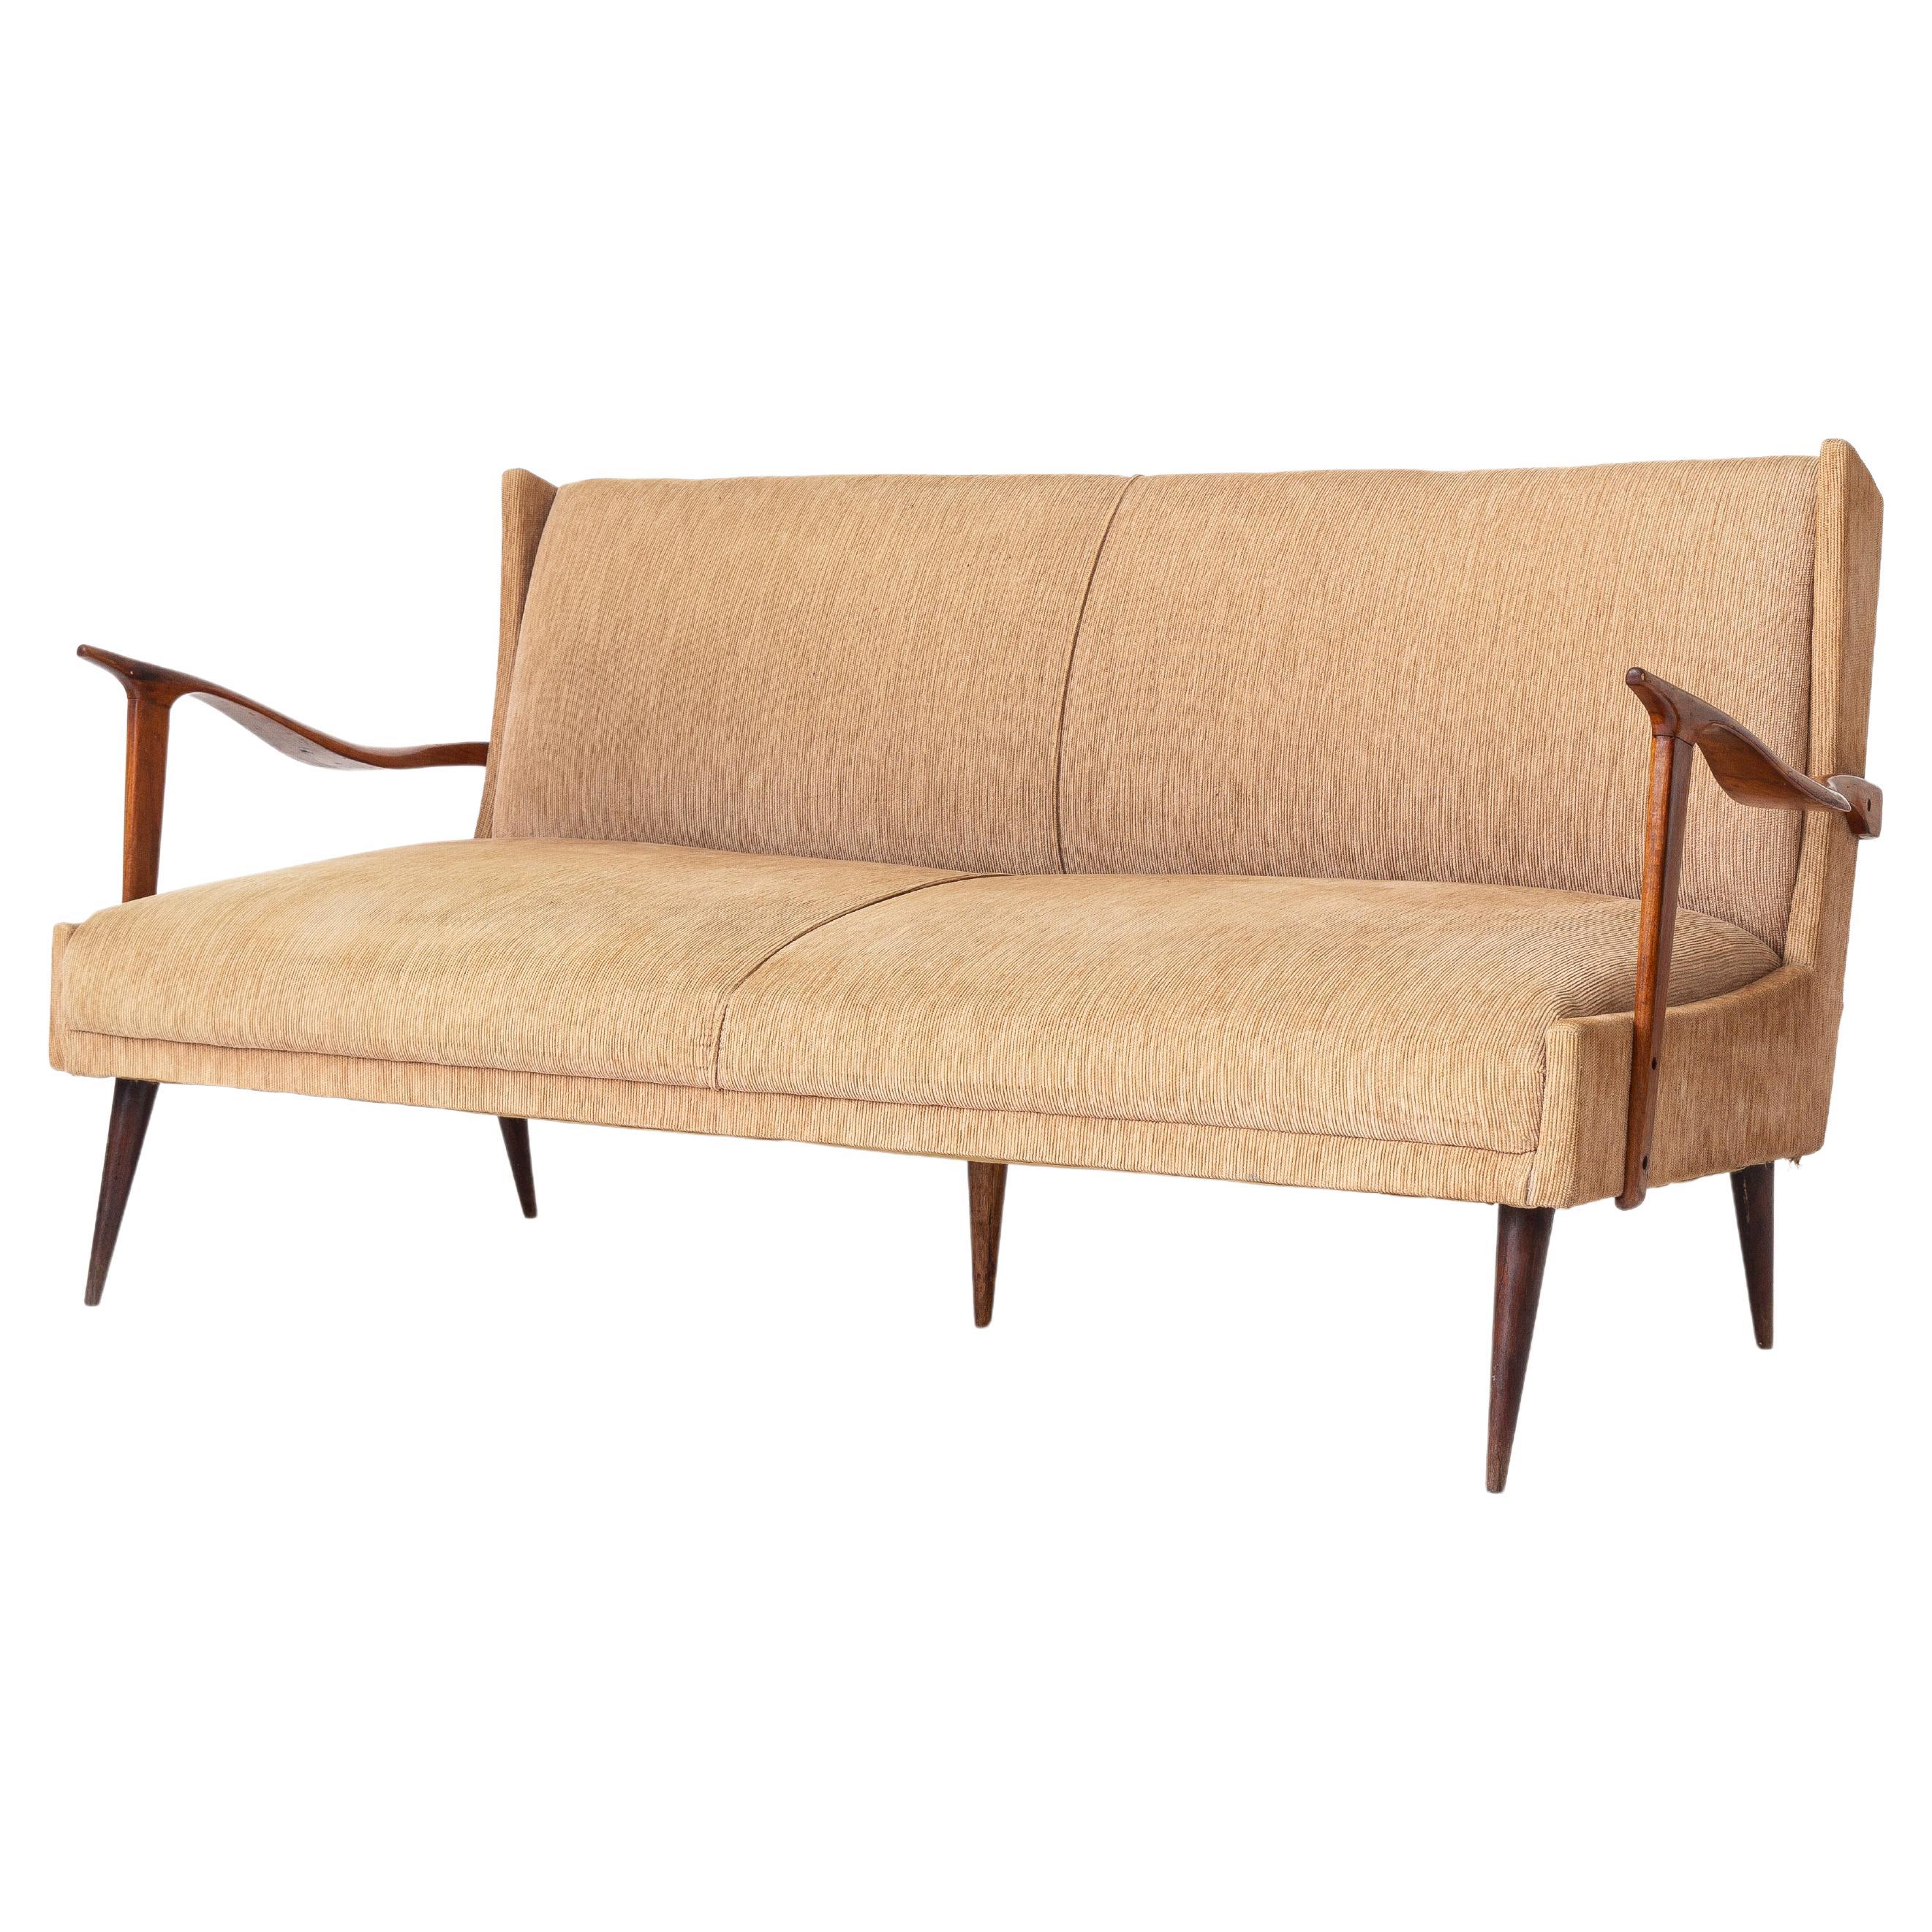 Guiseppe Scapinelli Sofa